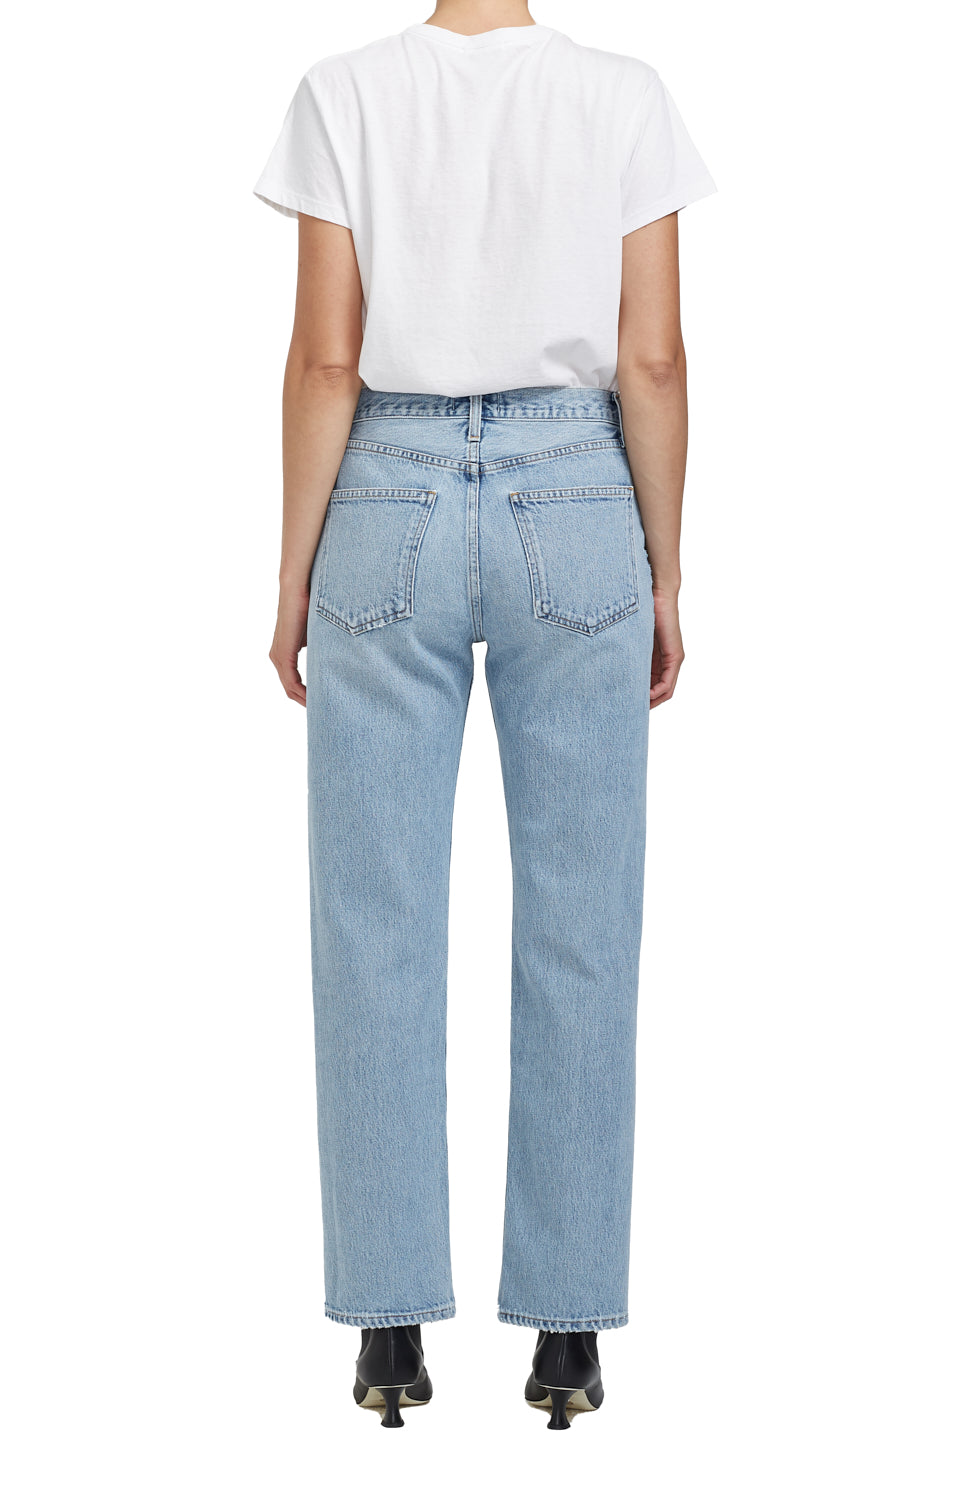 AGoldE - Lana Mid-Rise Full Length Jeans in Fiction